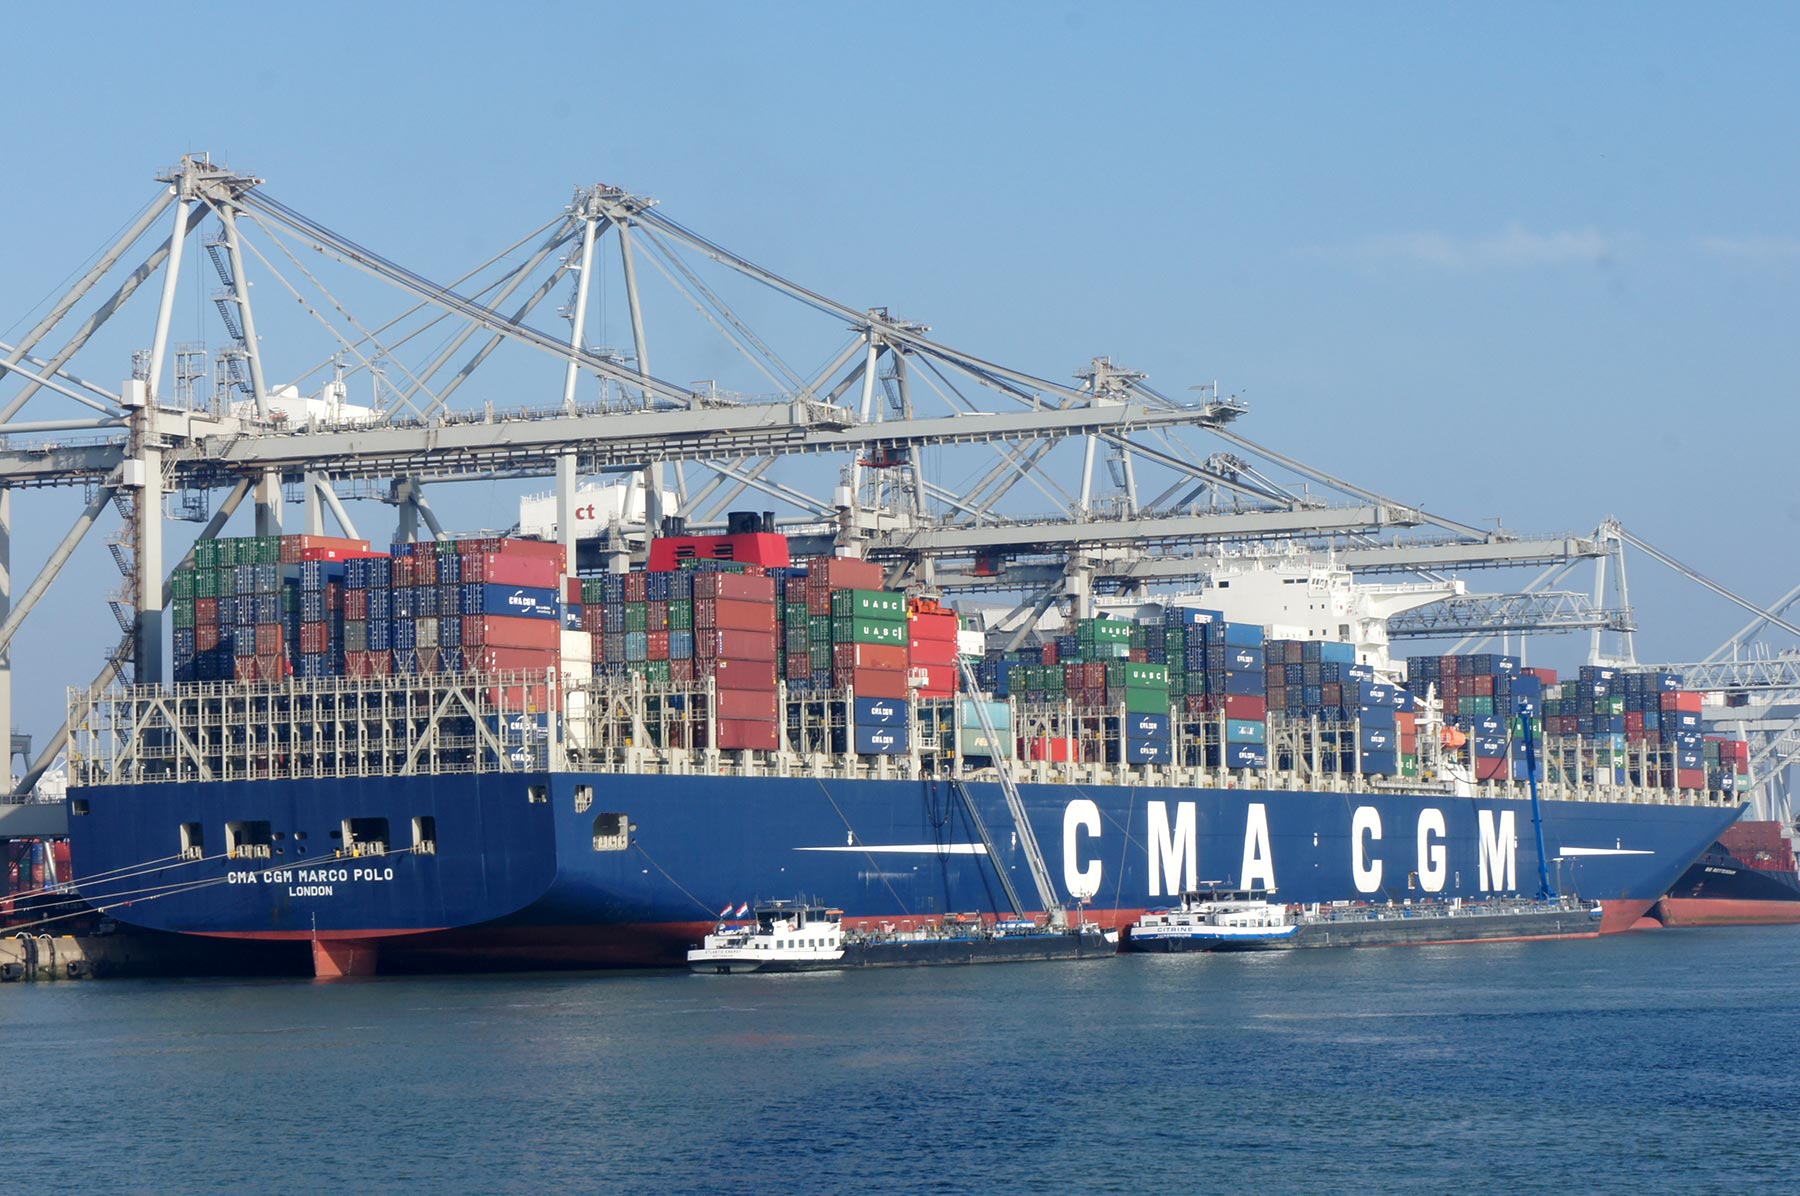 The CMA CGM Marco Polo has arrived in Norfolk at the Port of Virginia.